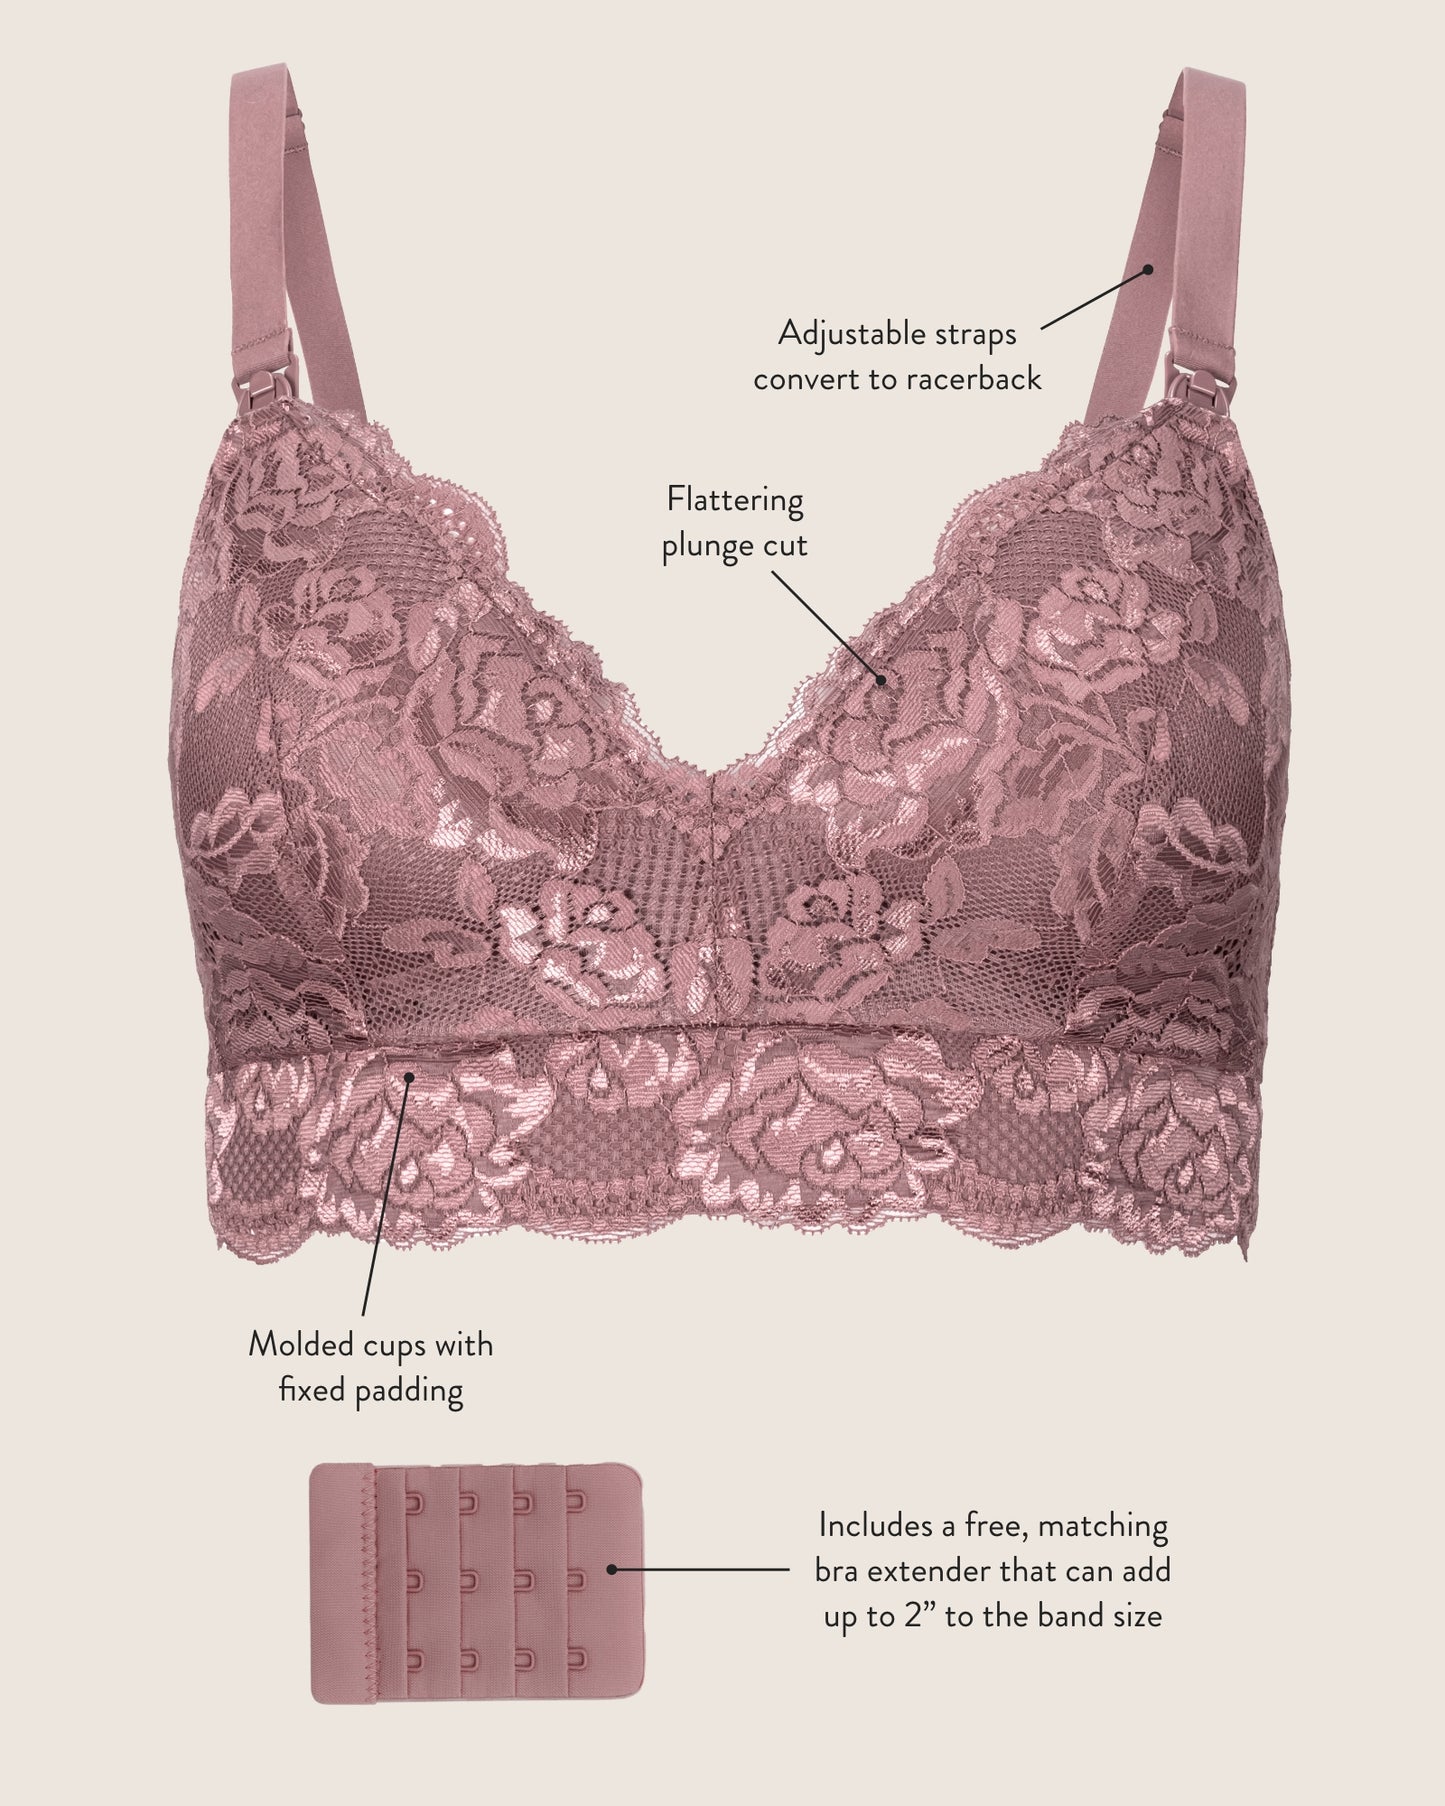 Flat image of the Lace Minimalist Nursing & Maternity Bra showcasing its' unique qualities: Adjustable straps that convert to racerback, flattering plunge cut, molded cups with fixed padding. 